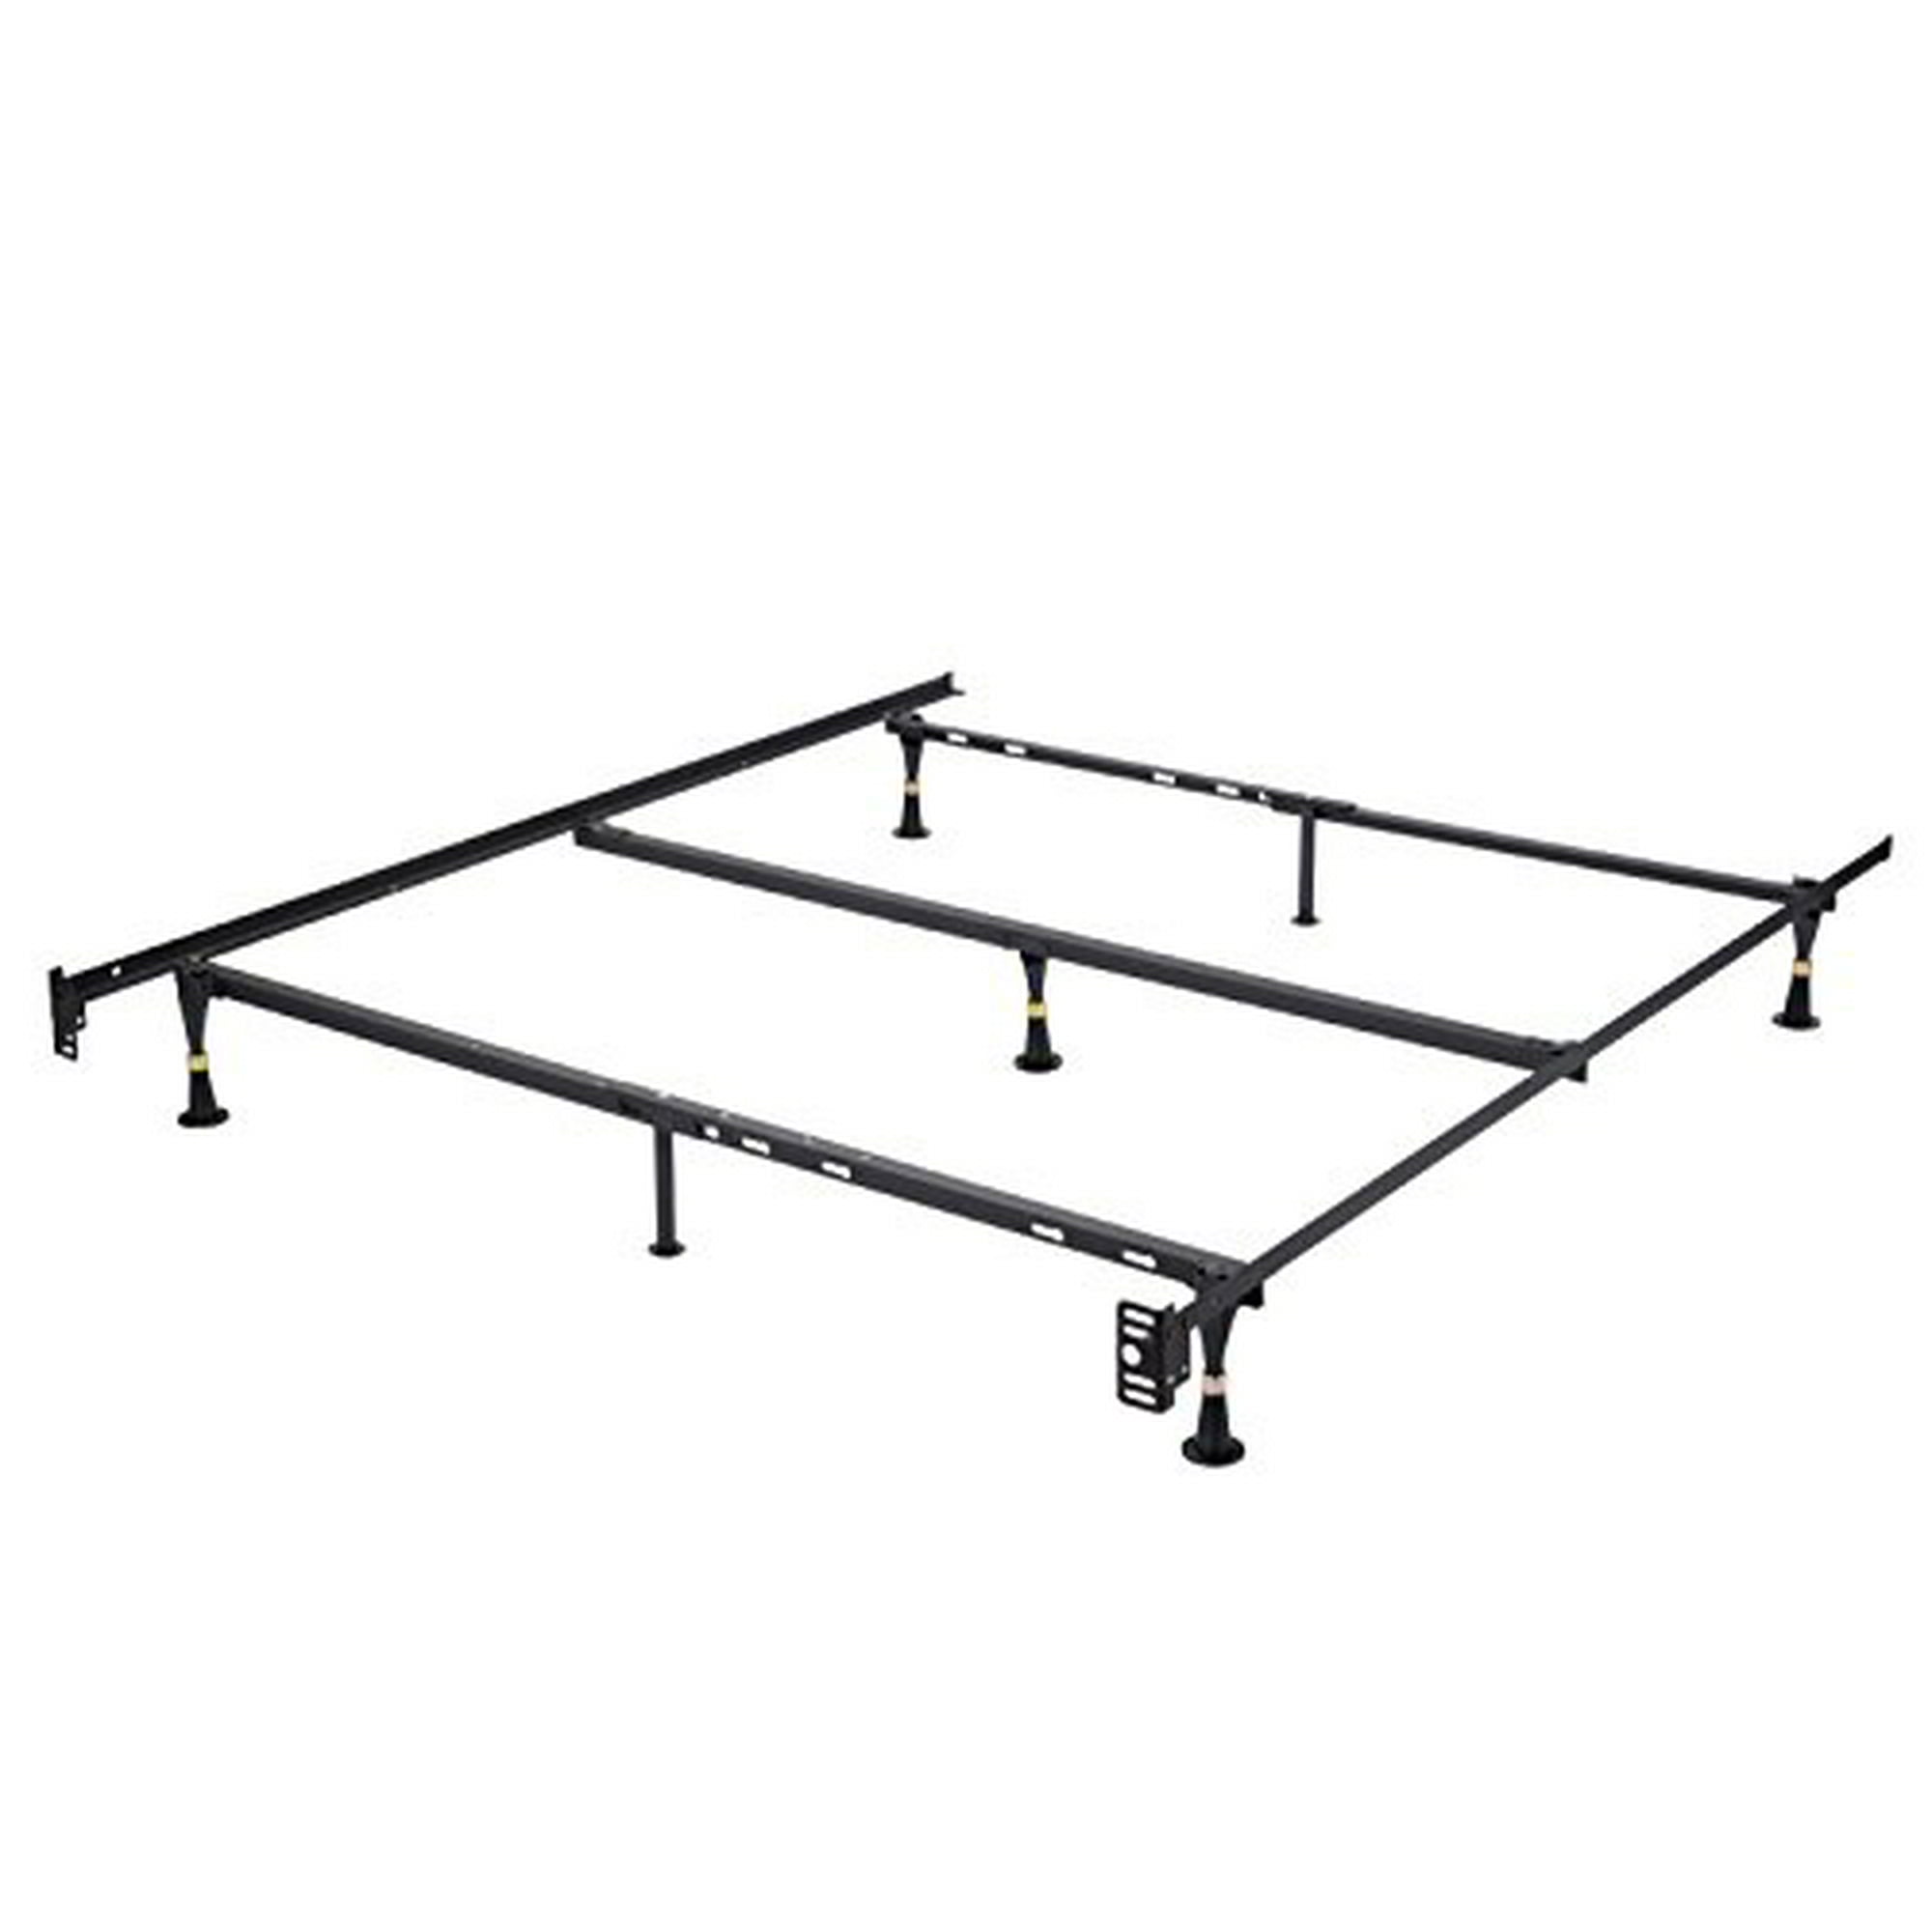 Full Xl Twin Bed Frame, Twin Xl Bed Frame Canada